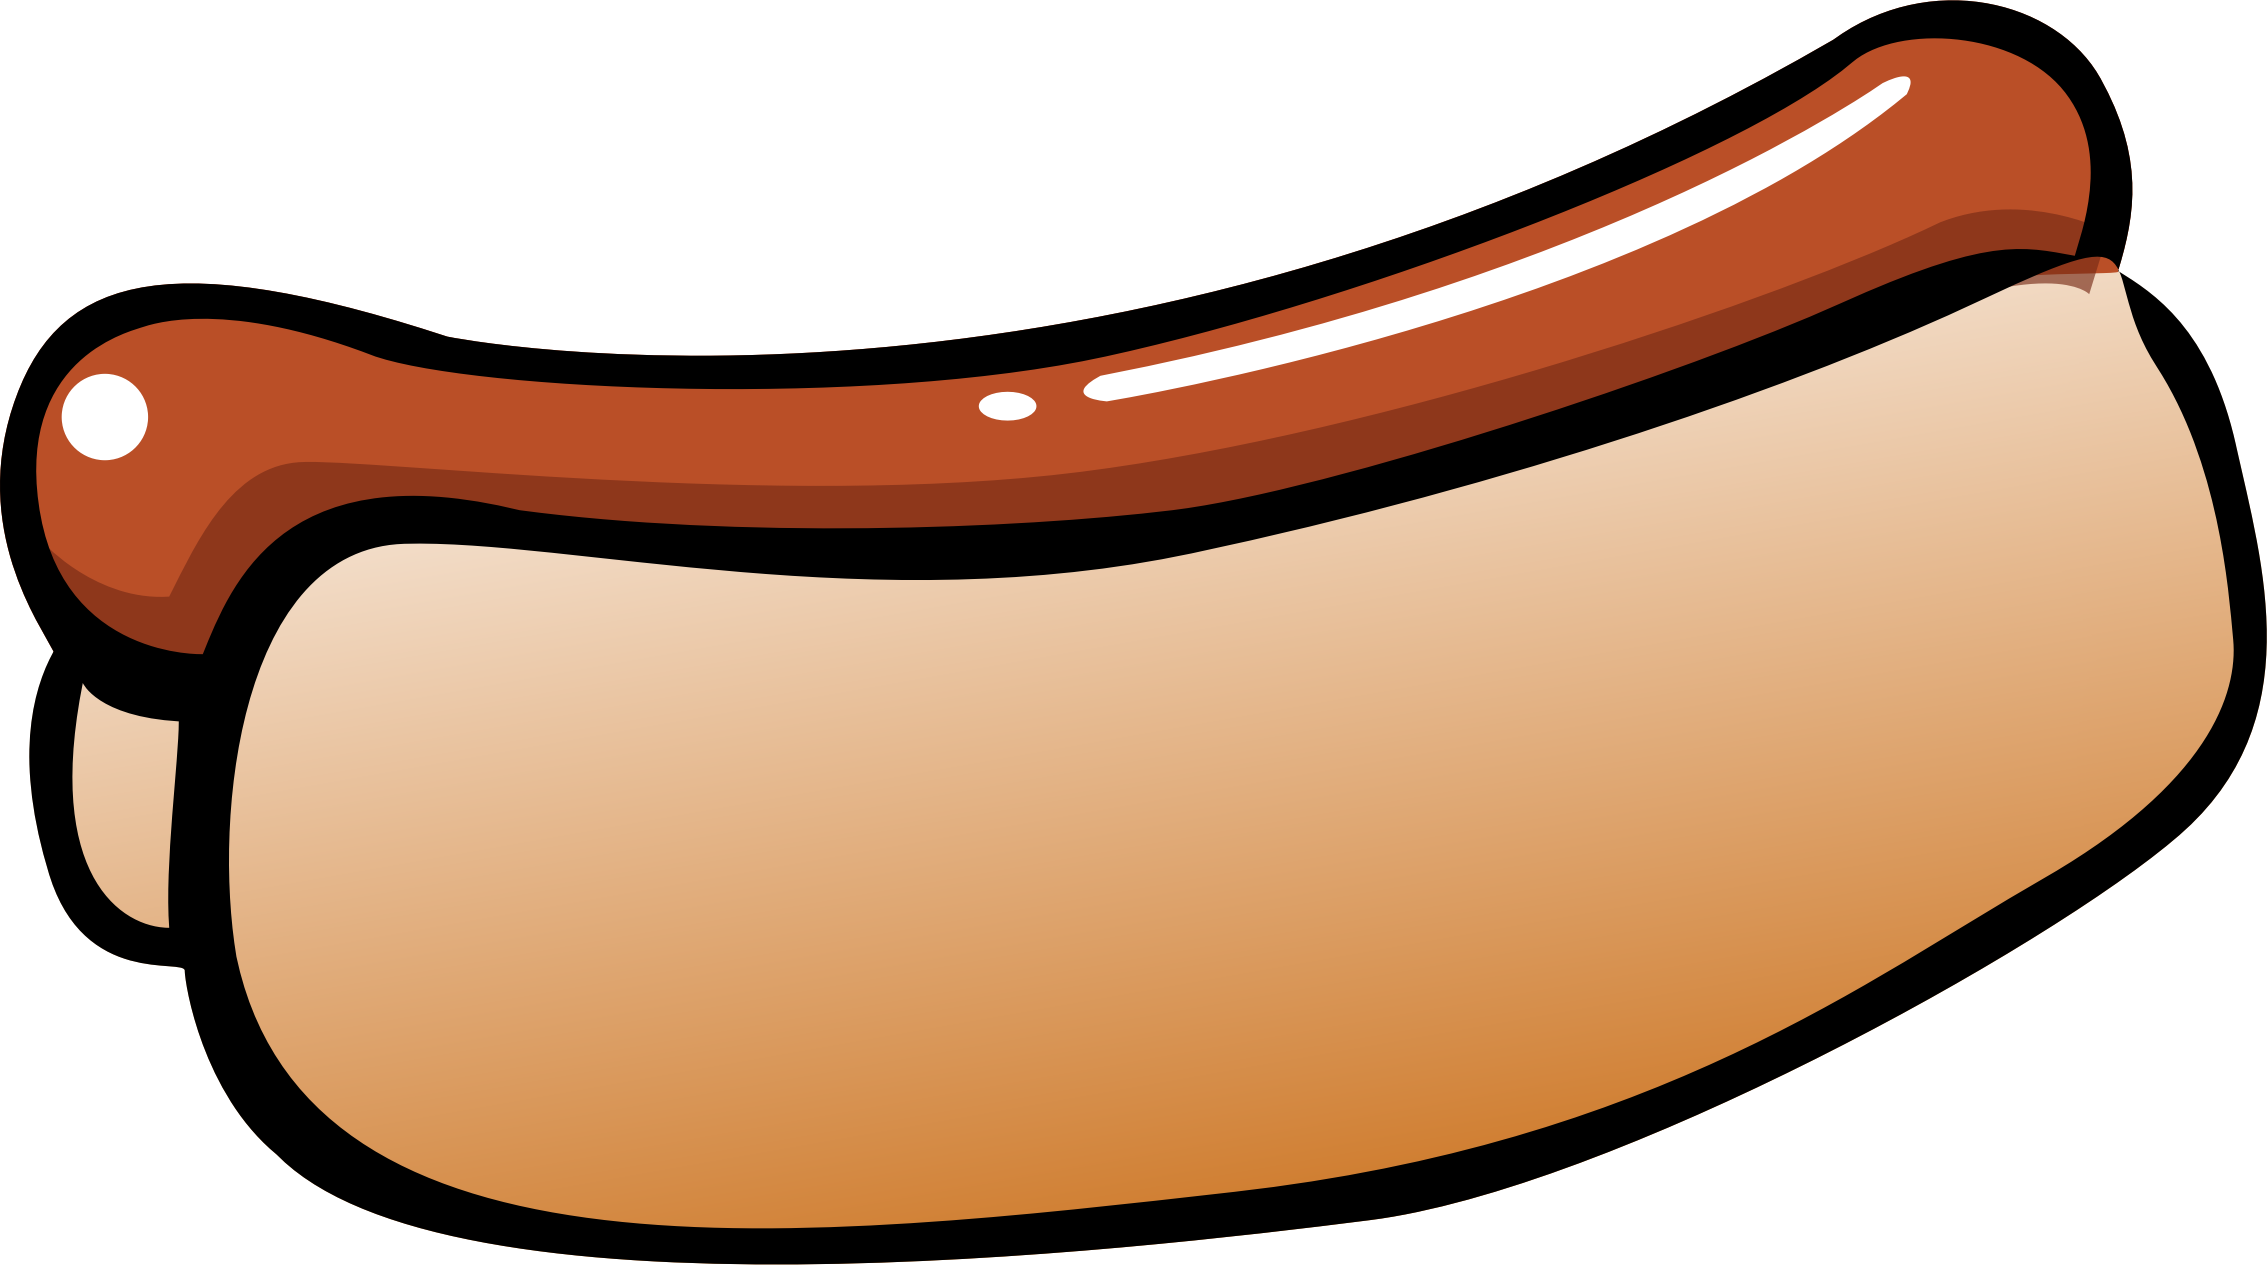 free clipart images of hot dogs - photo #15